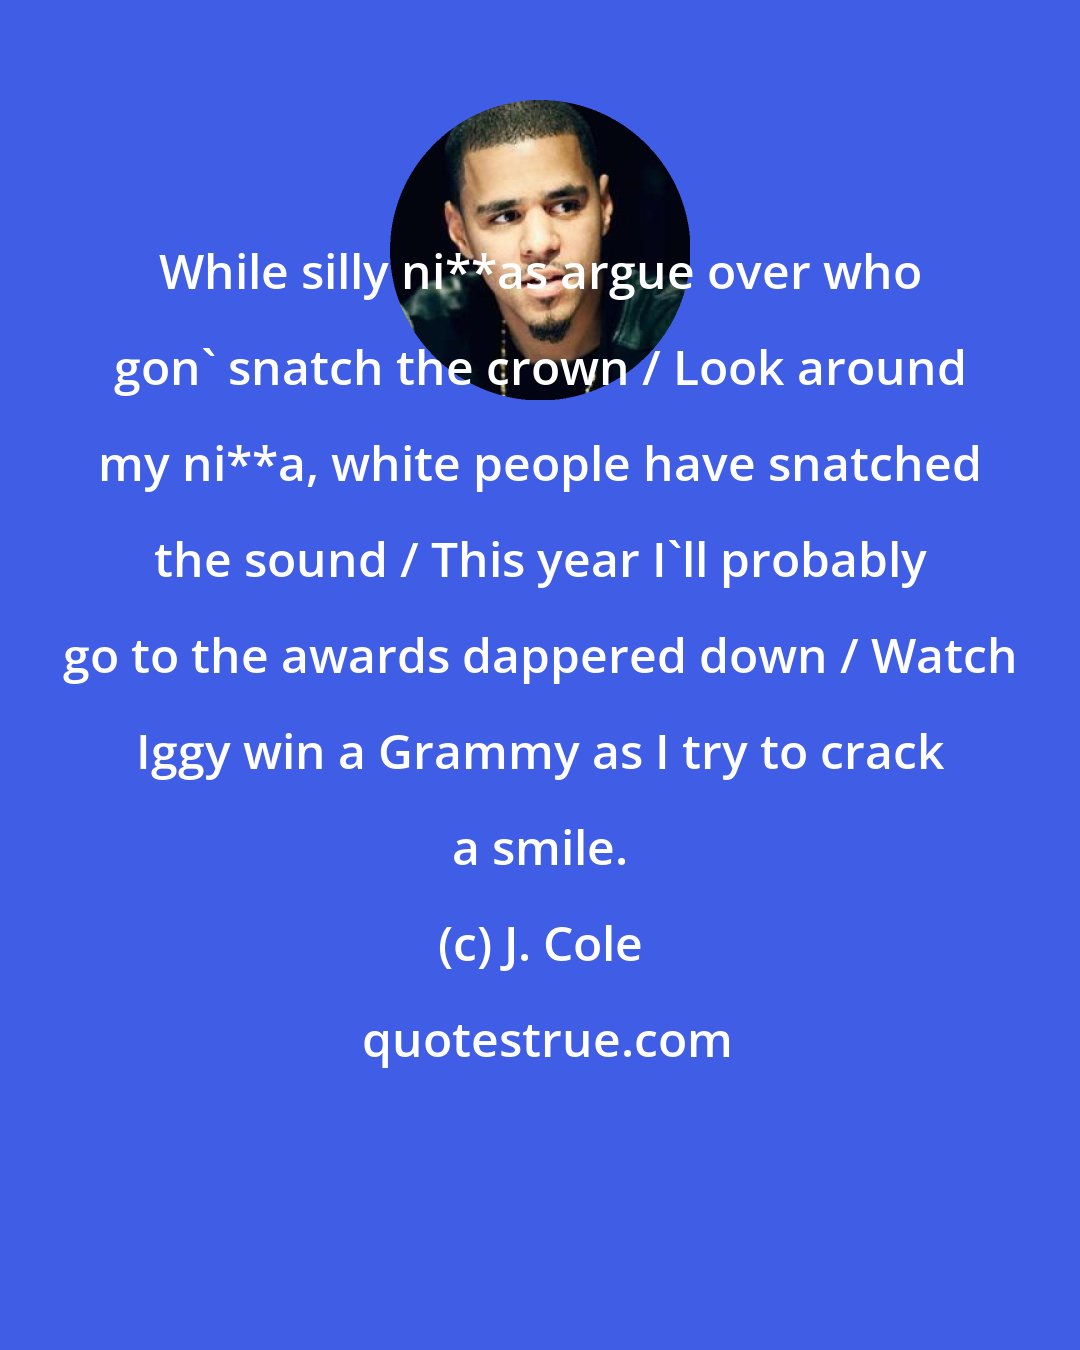 J. Cole: While silly ni**as argue over who gon' snatch the crown / Look around my ni**a, white people have snatched the sound / This year I'll probably go to the awards dappered down / Watch Iggy win a Grammy as I try to crack a smile.